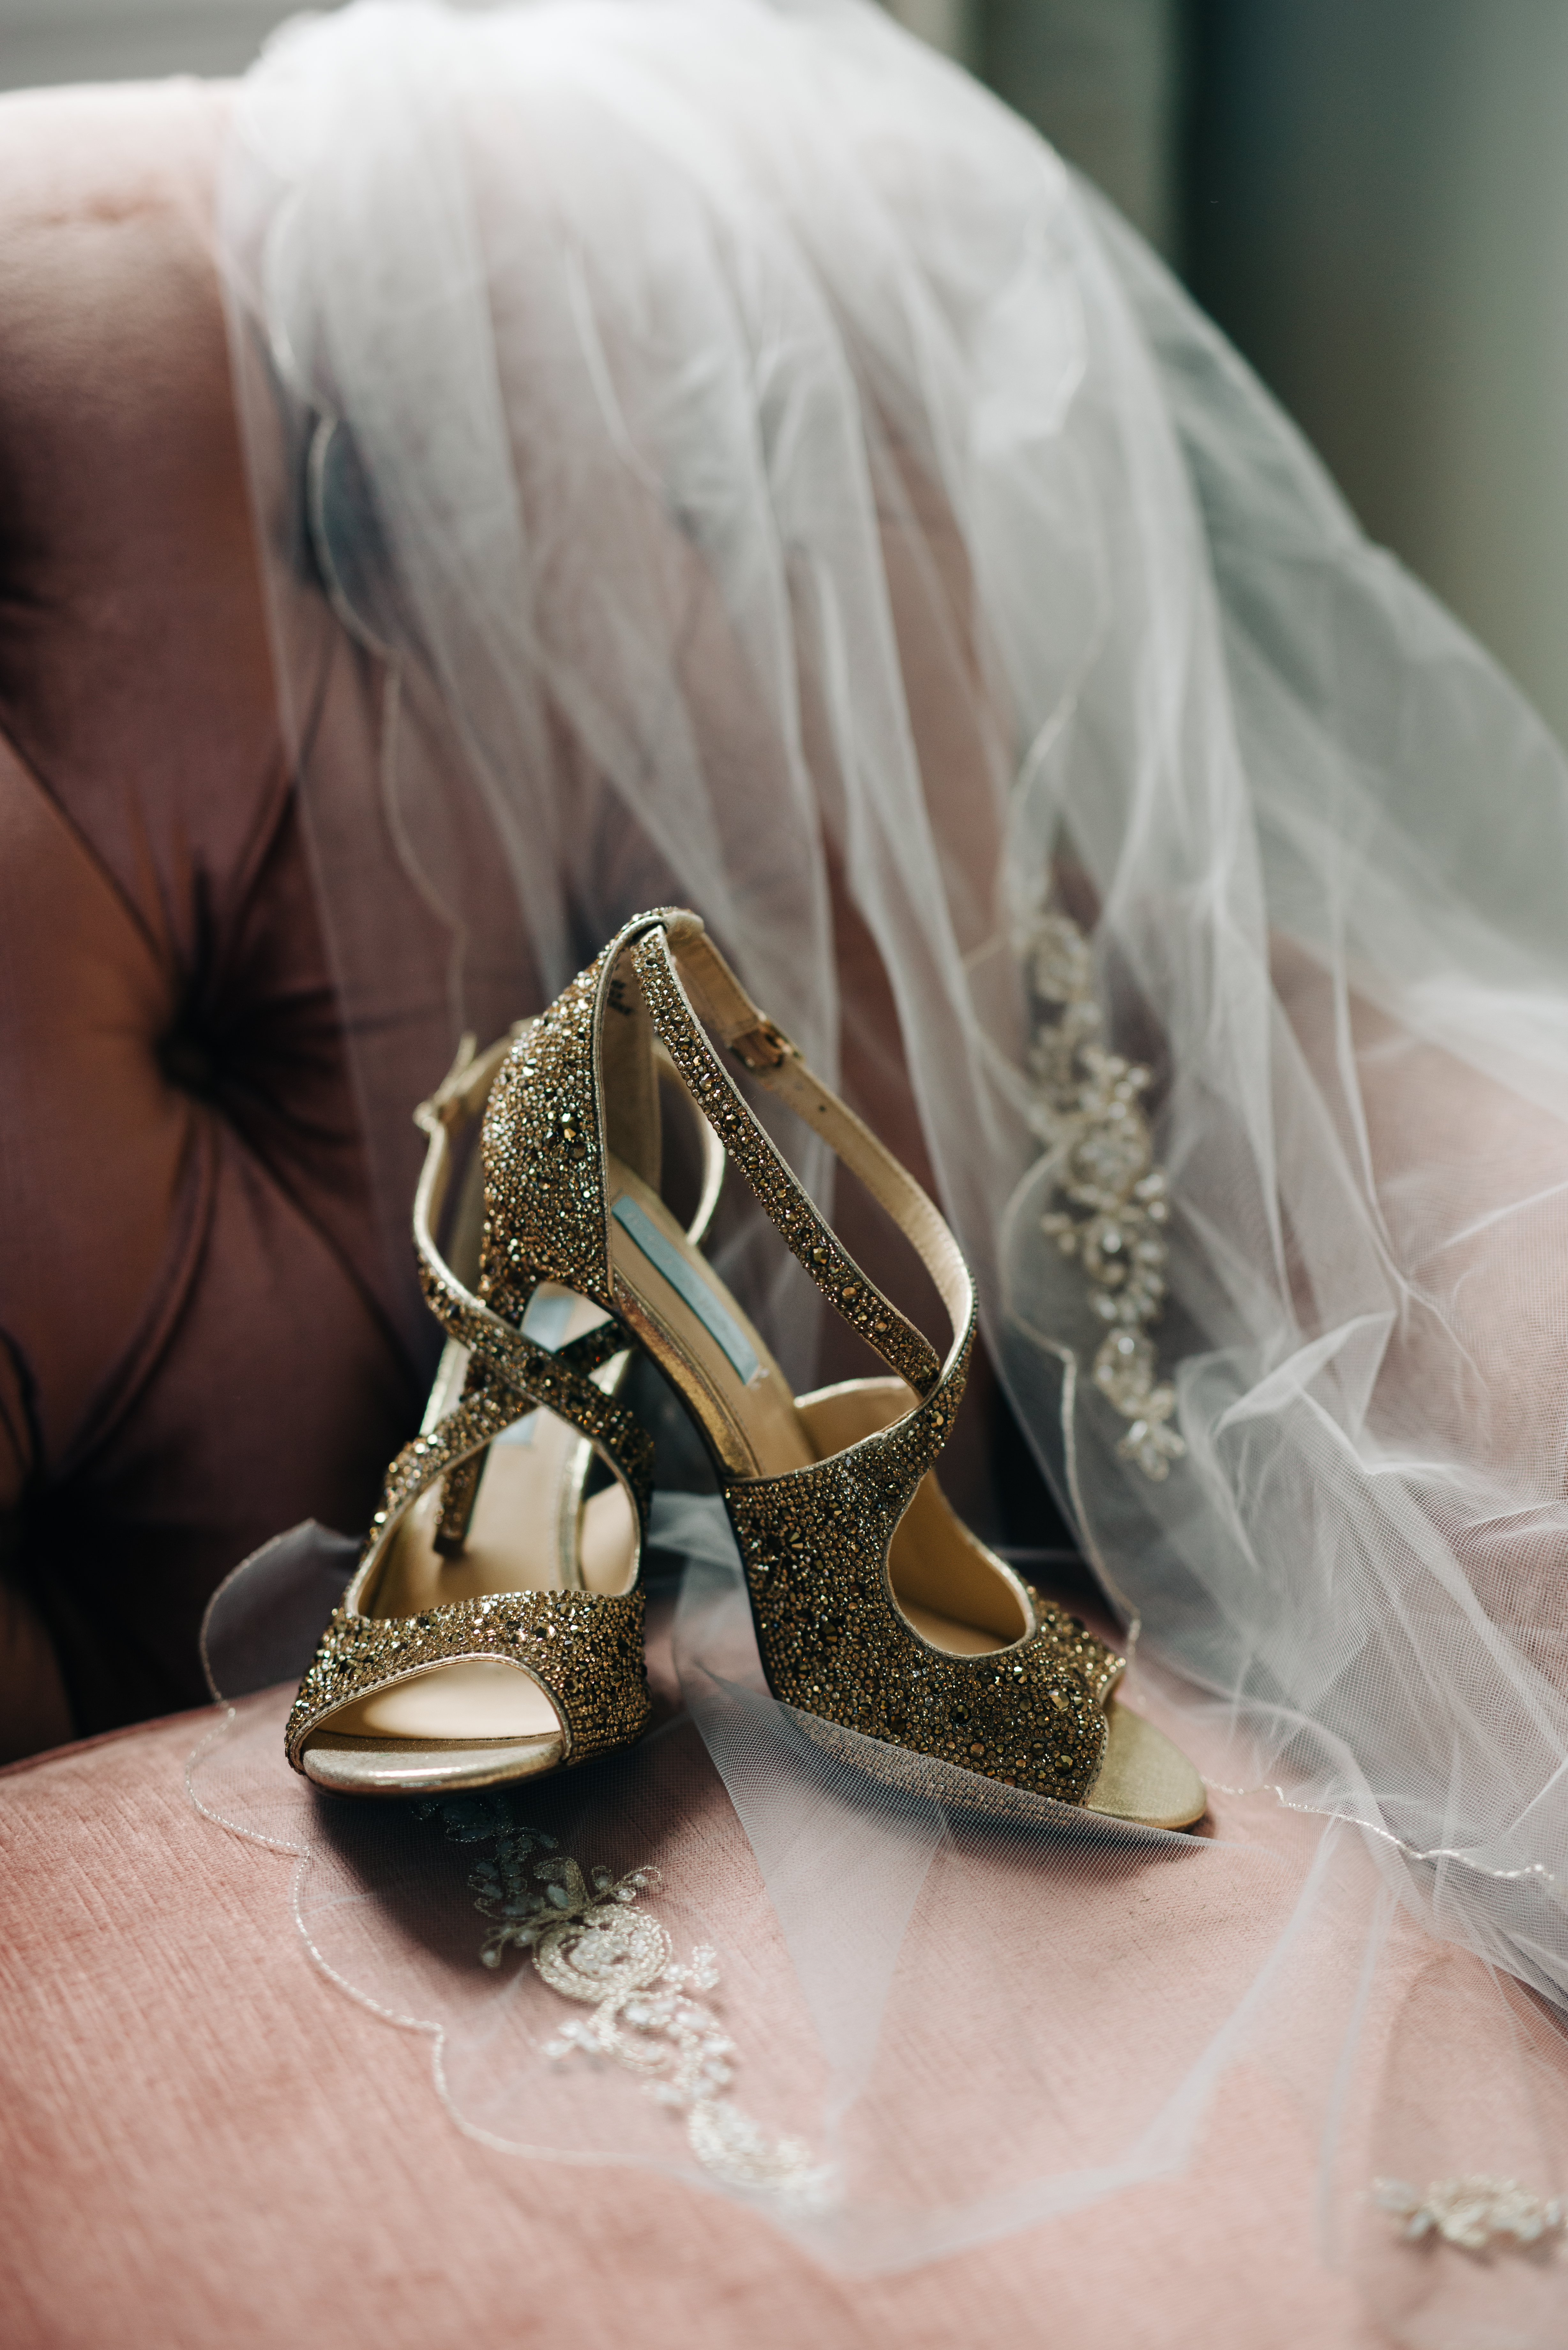 Gold bridal shoes at McAlister-Leftwich House | Greensboro, NC